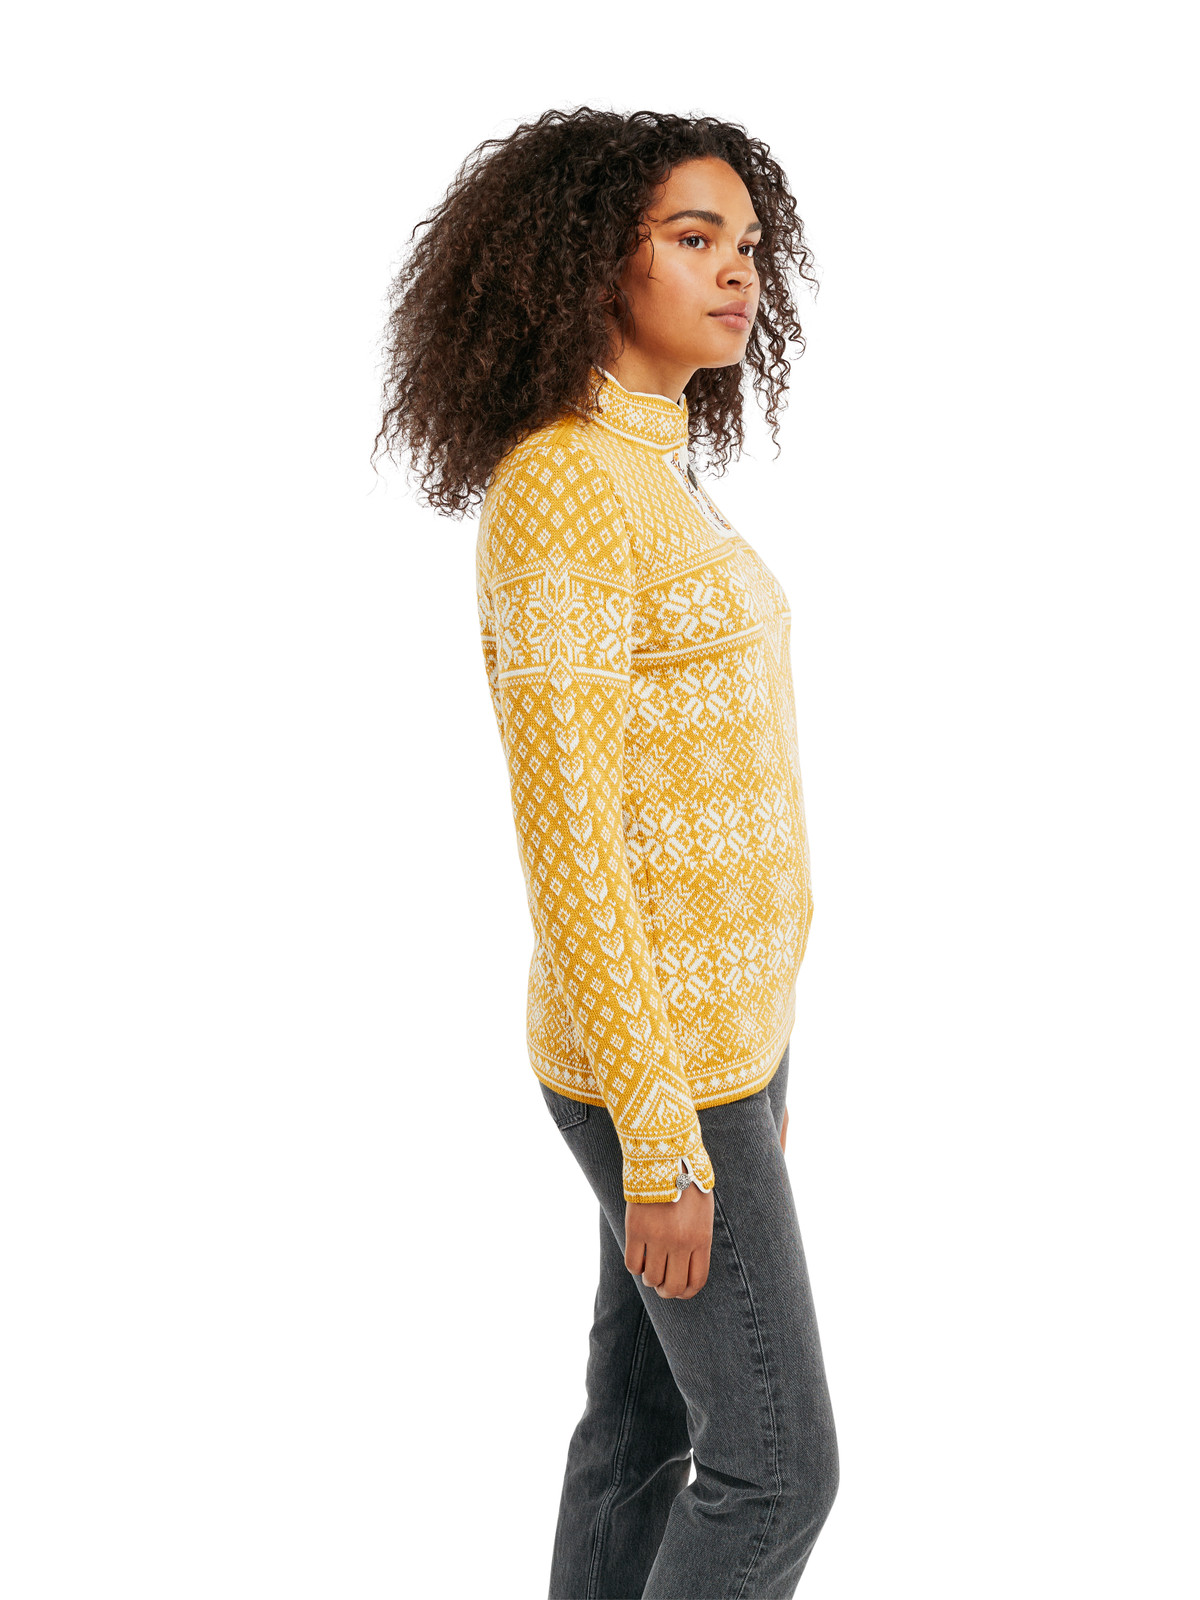 Dale of Norway Peace Women's Sweater, Mustard/Off White, 13312-O00_side